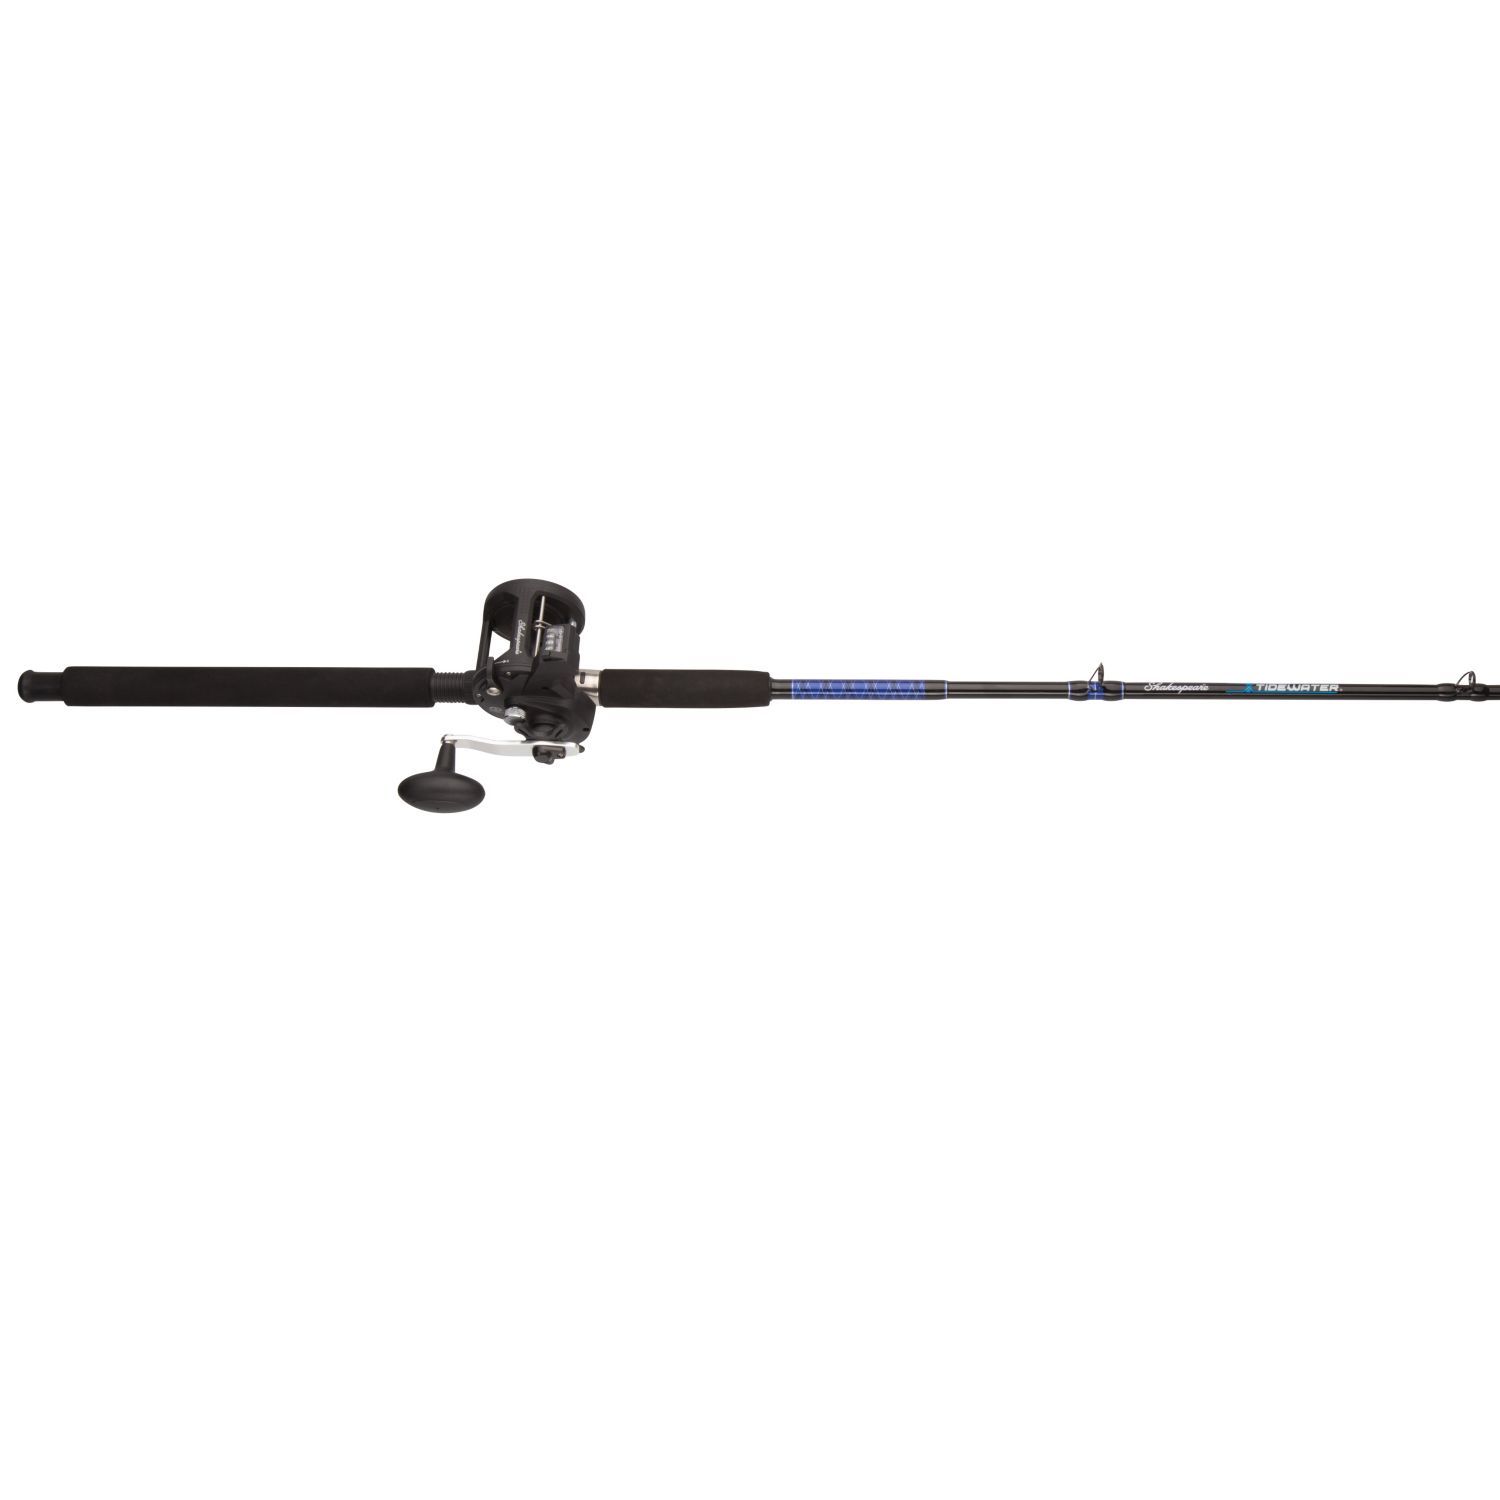 Shakespeare Tidewater 30 fishing reel of the day #fishing #reel